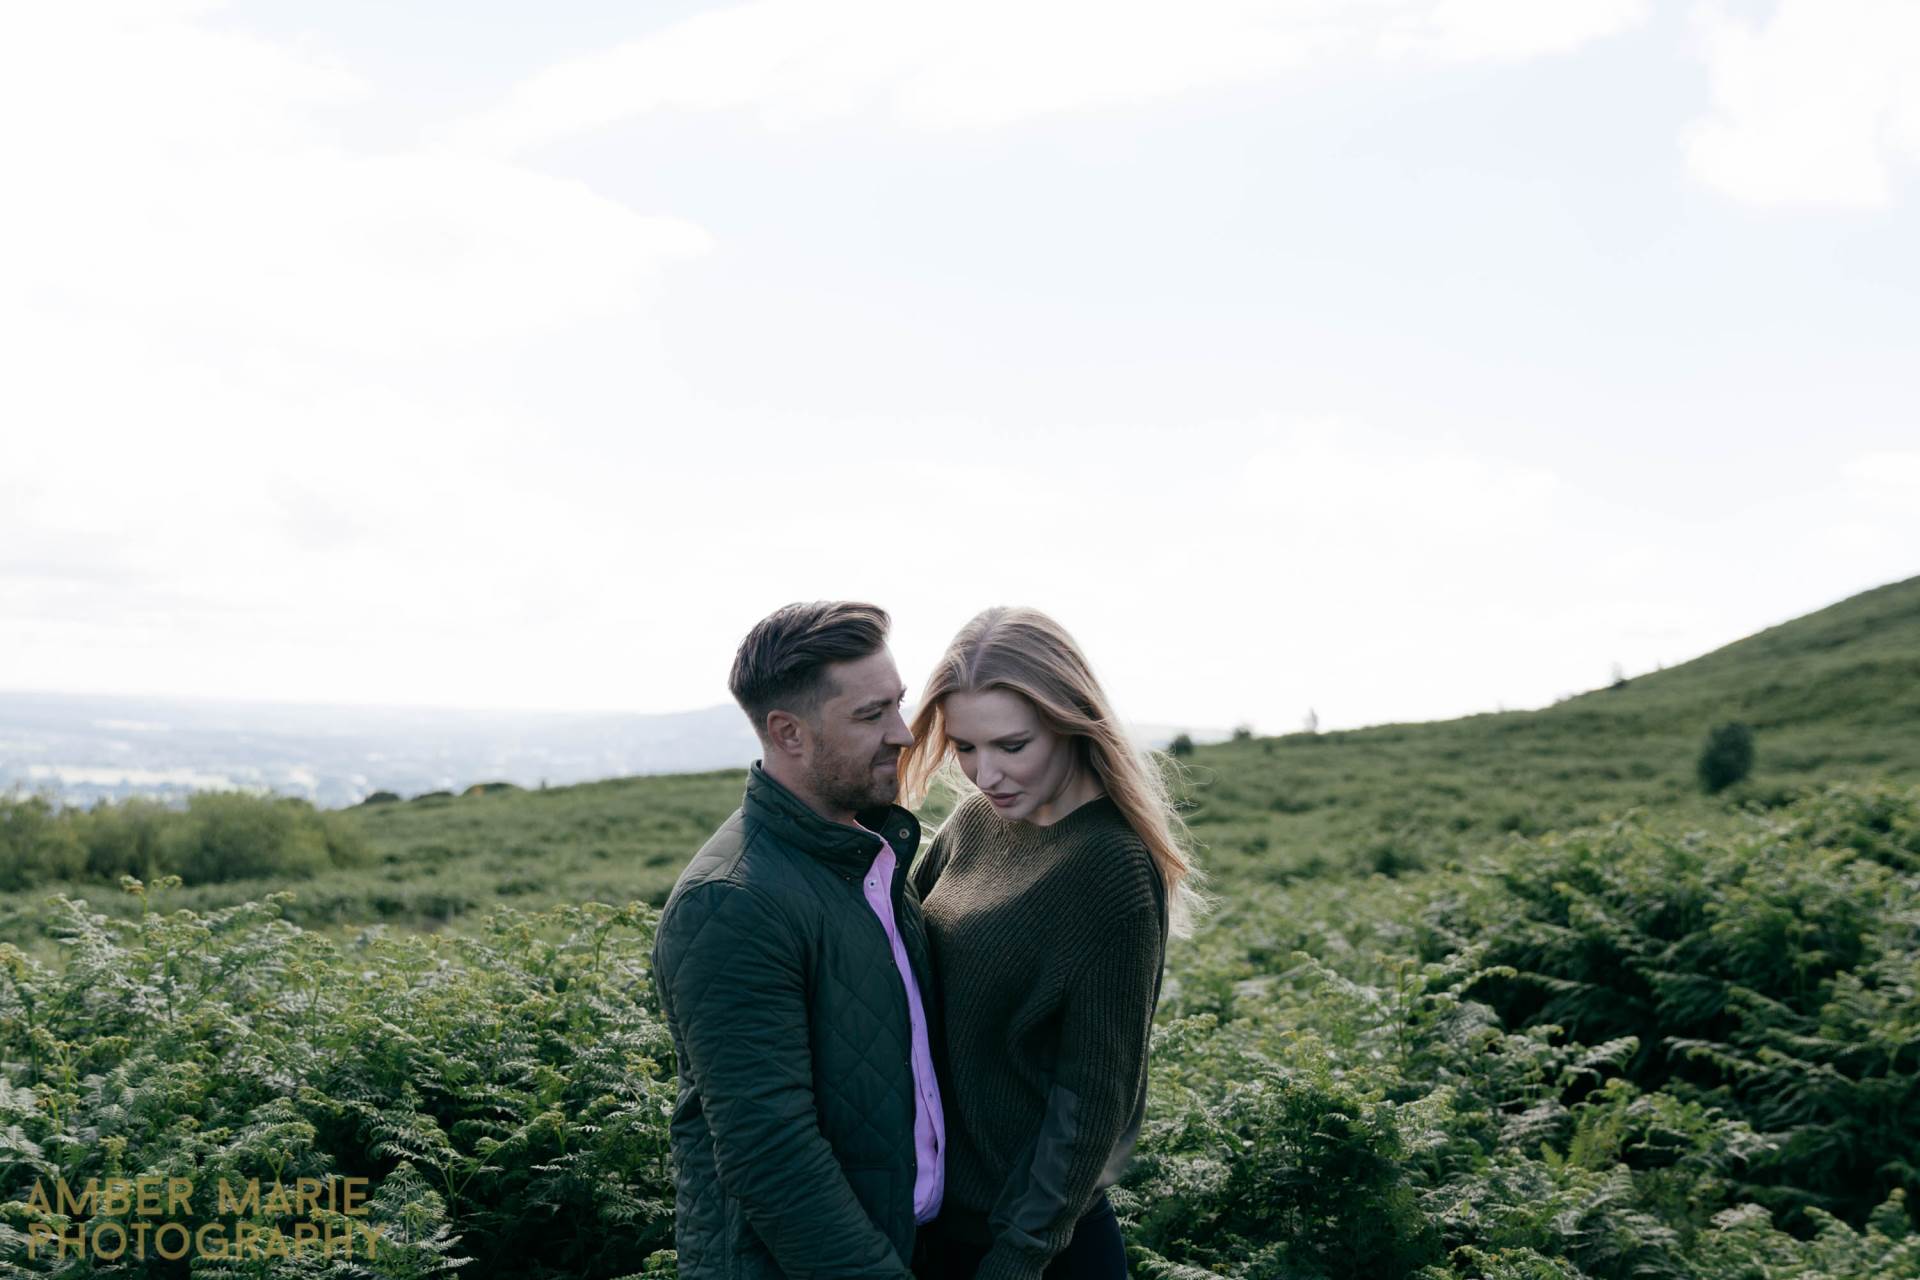 Should you have an engagement shoot before our wedding day